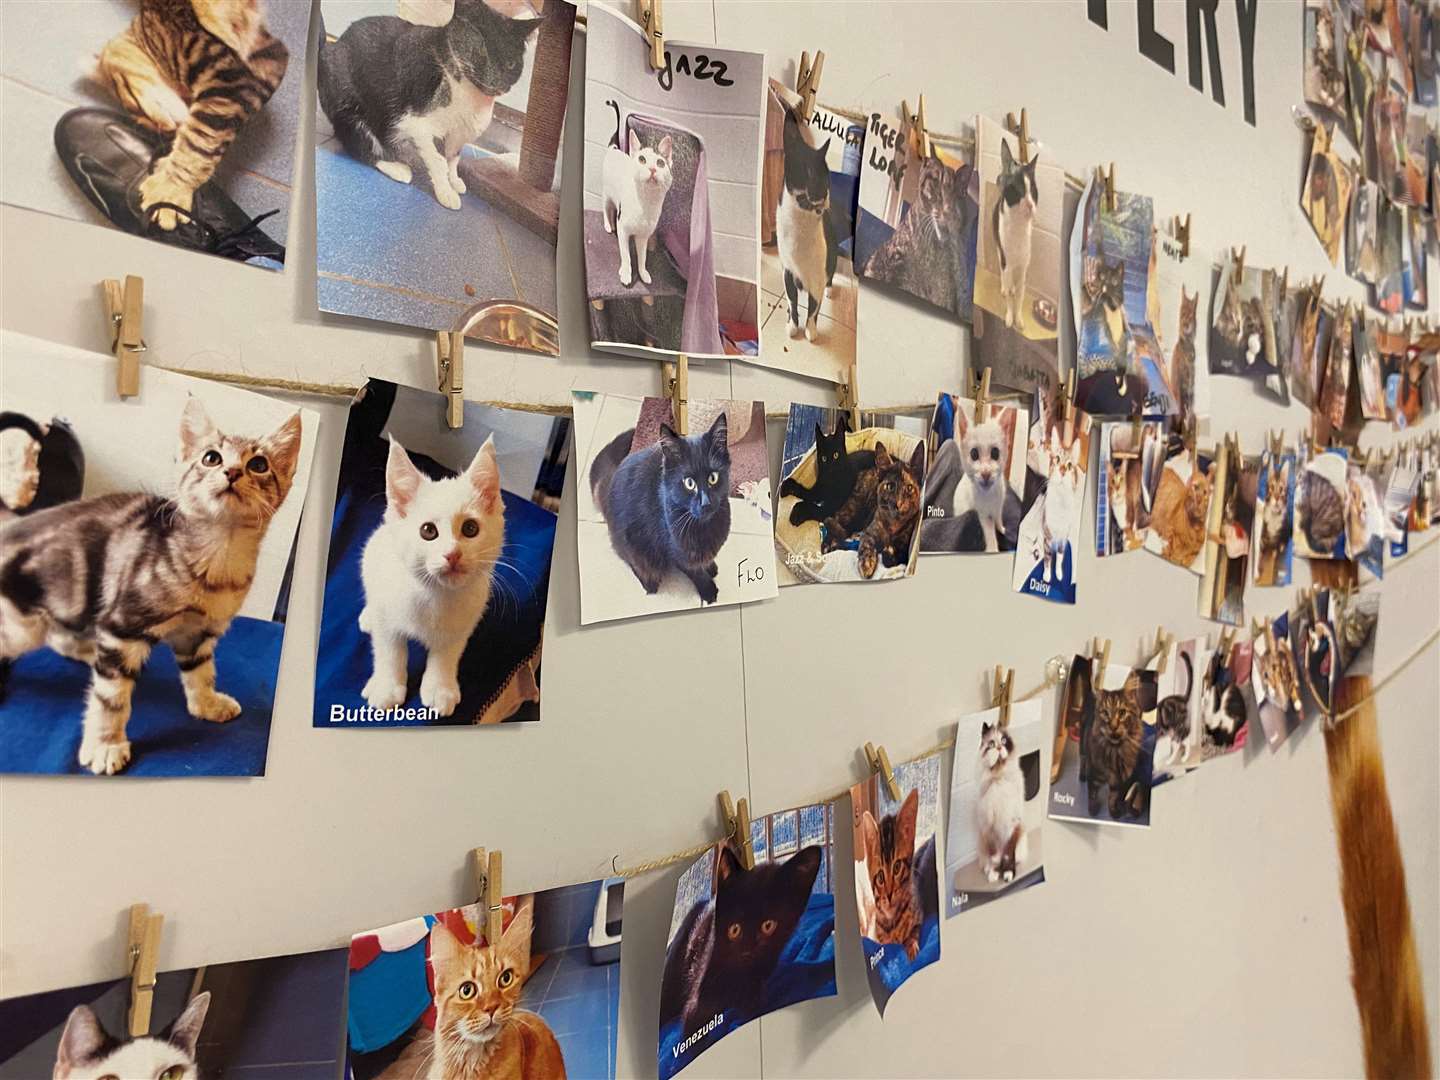 Battersea has approximately 200 cats in our care across its three sites